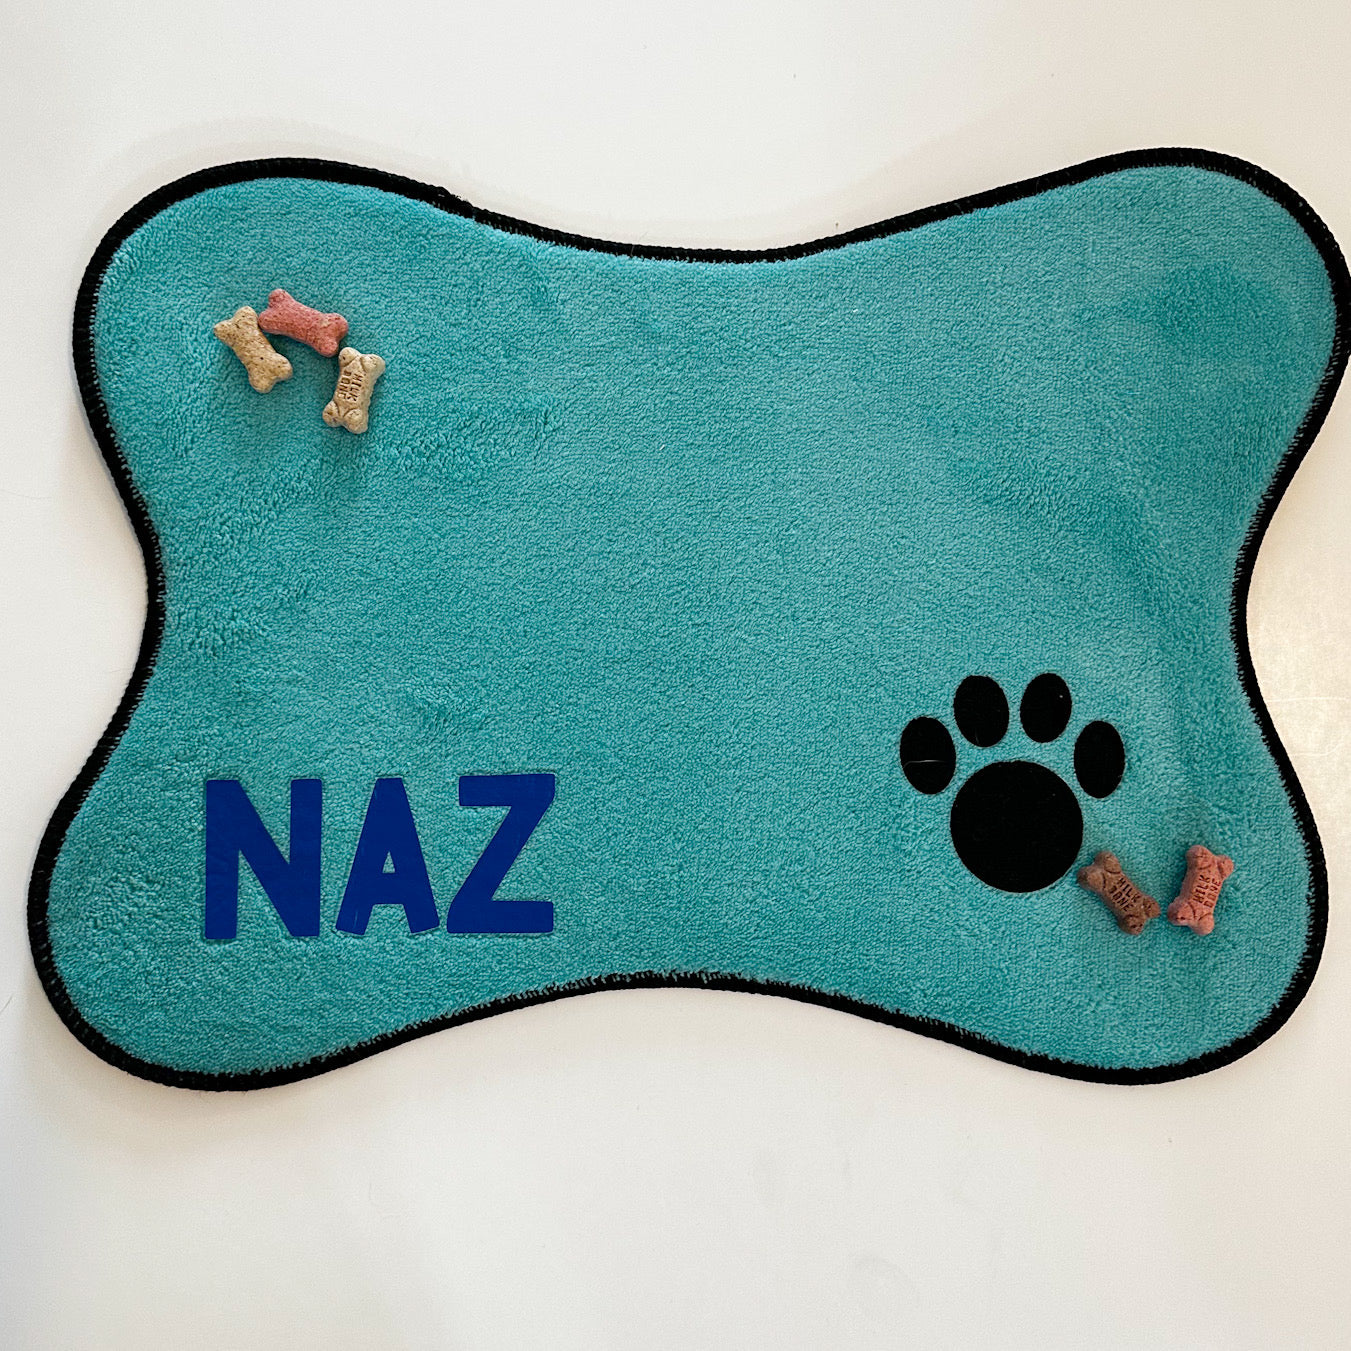 Personalised with any name Pet Dog bowl feeding mat 60 x 40 cm Large mat